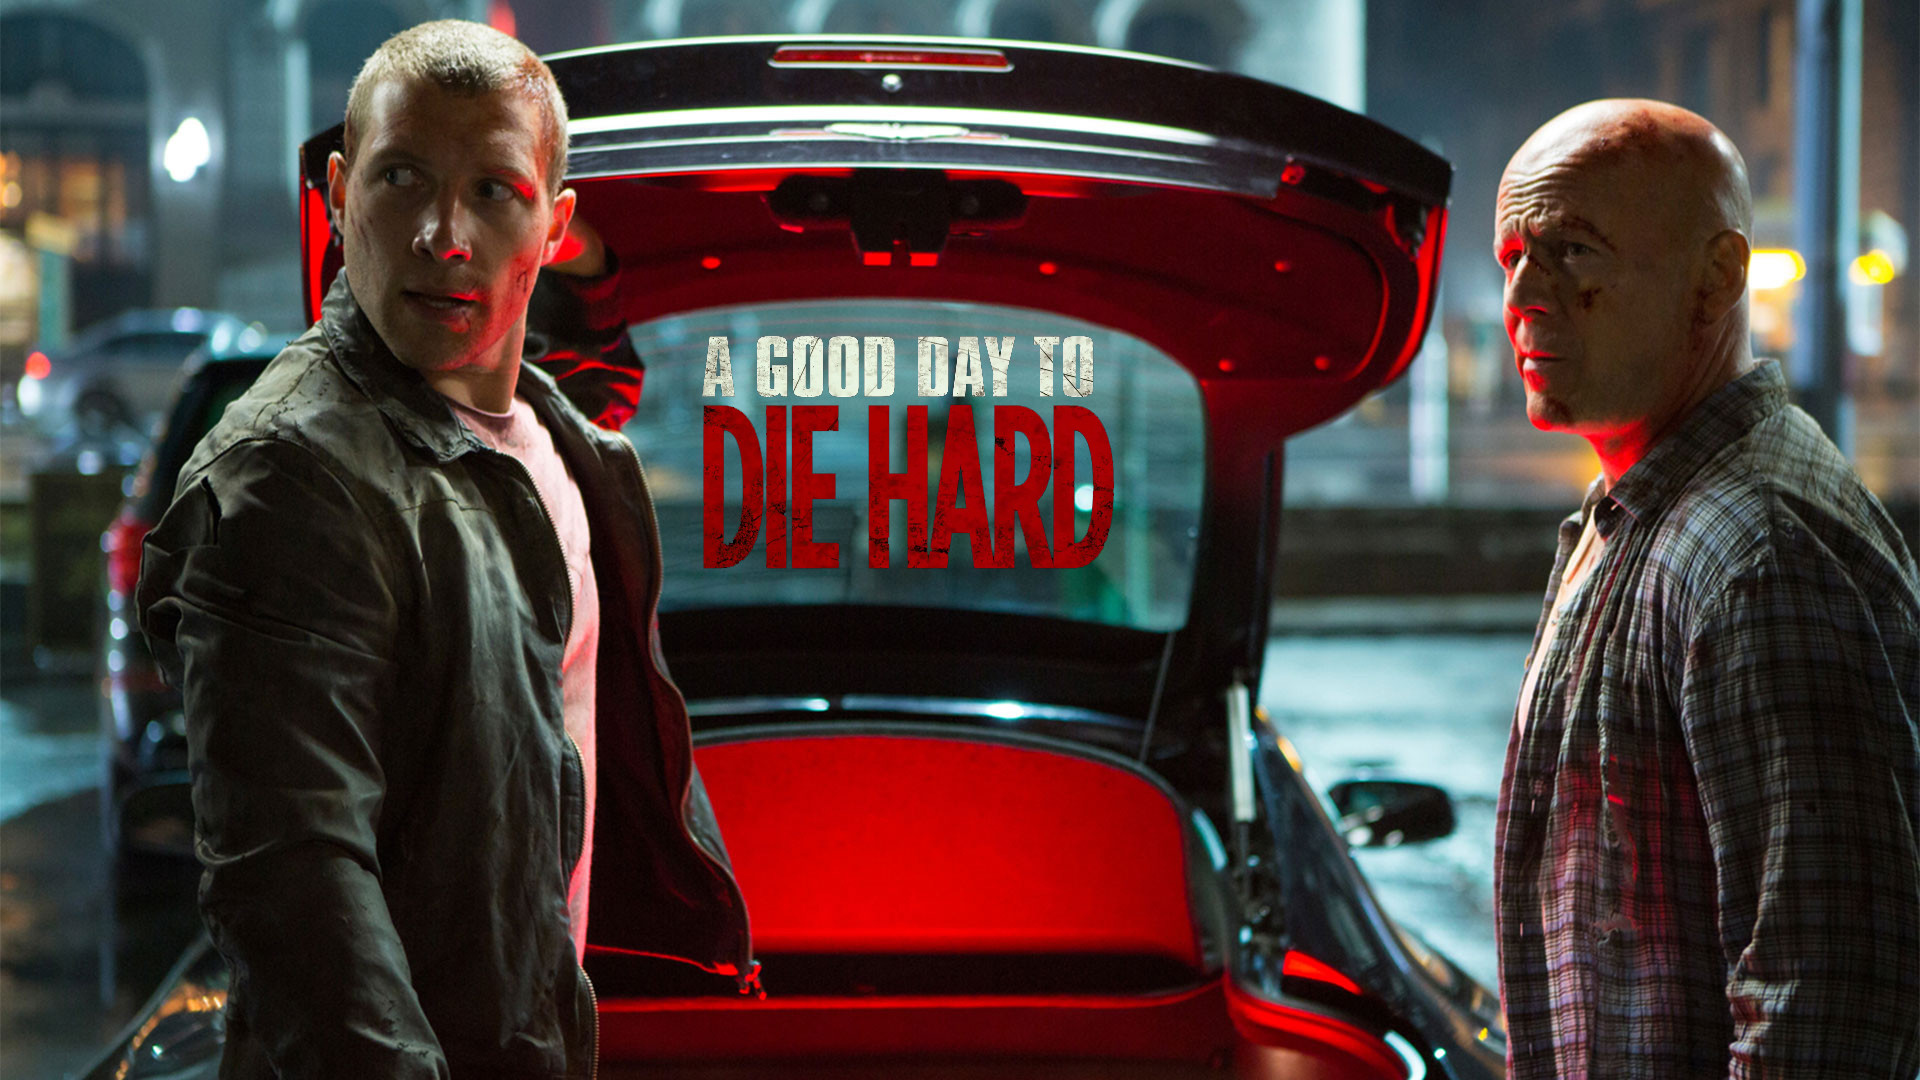 1920x1080 A Good Day to Die Hard wallpaper 2